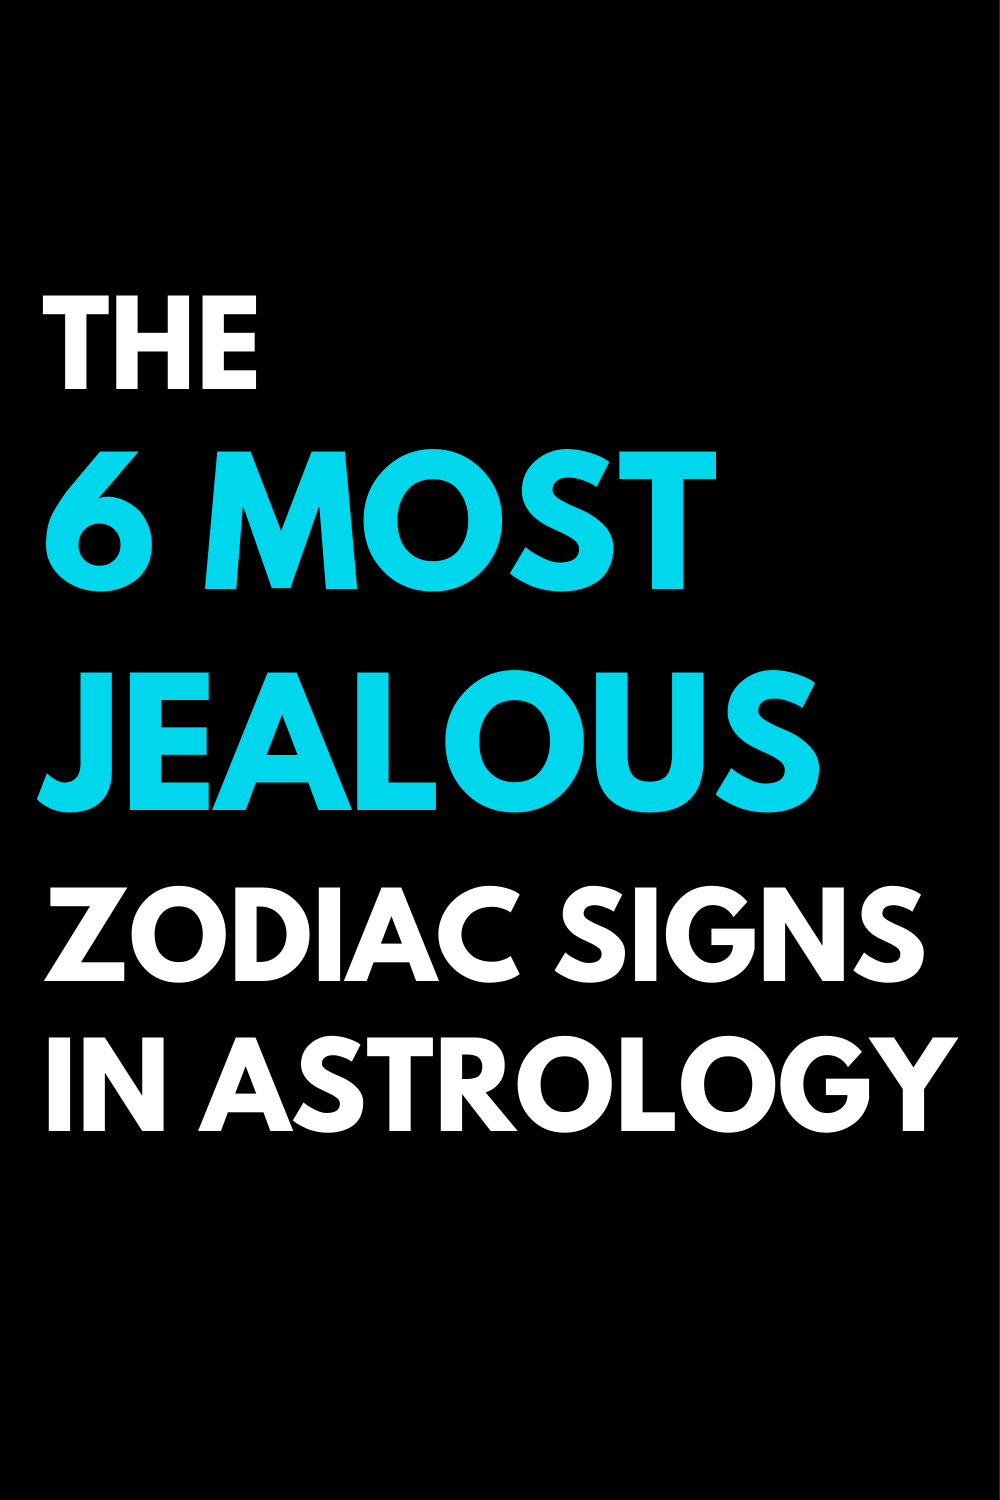 The 6 most jealous zodiac signs in astrology